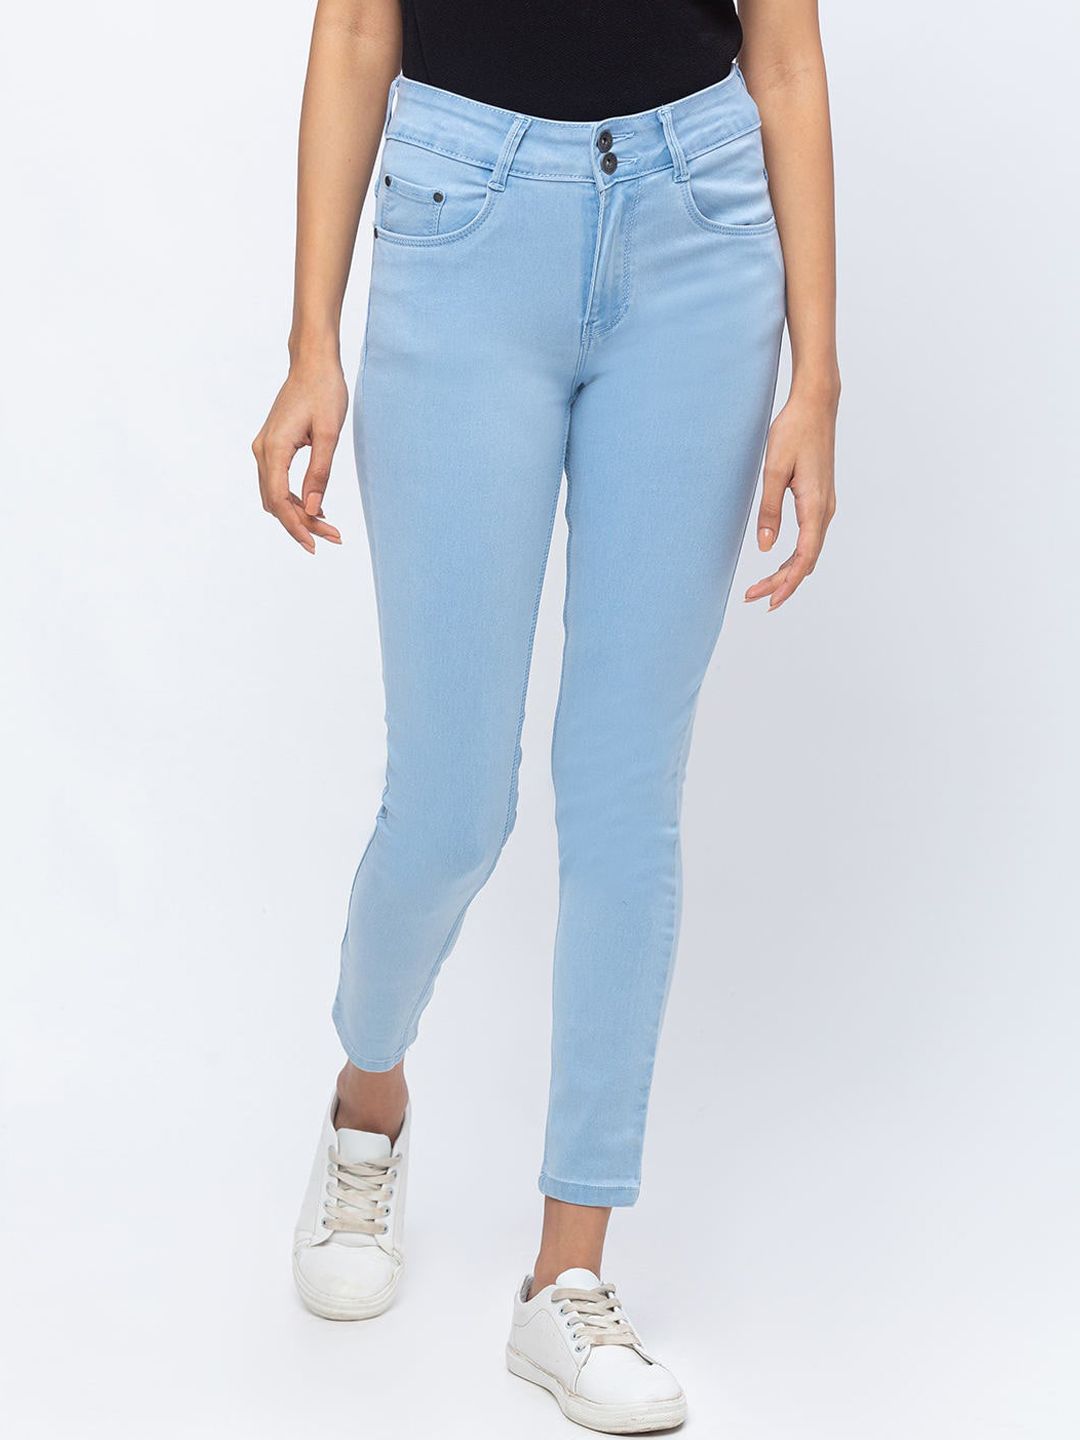 ZOLA Women Ice Blue Slim Fit Ankle Length Jeans with Two Buttons Price in India